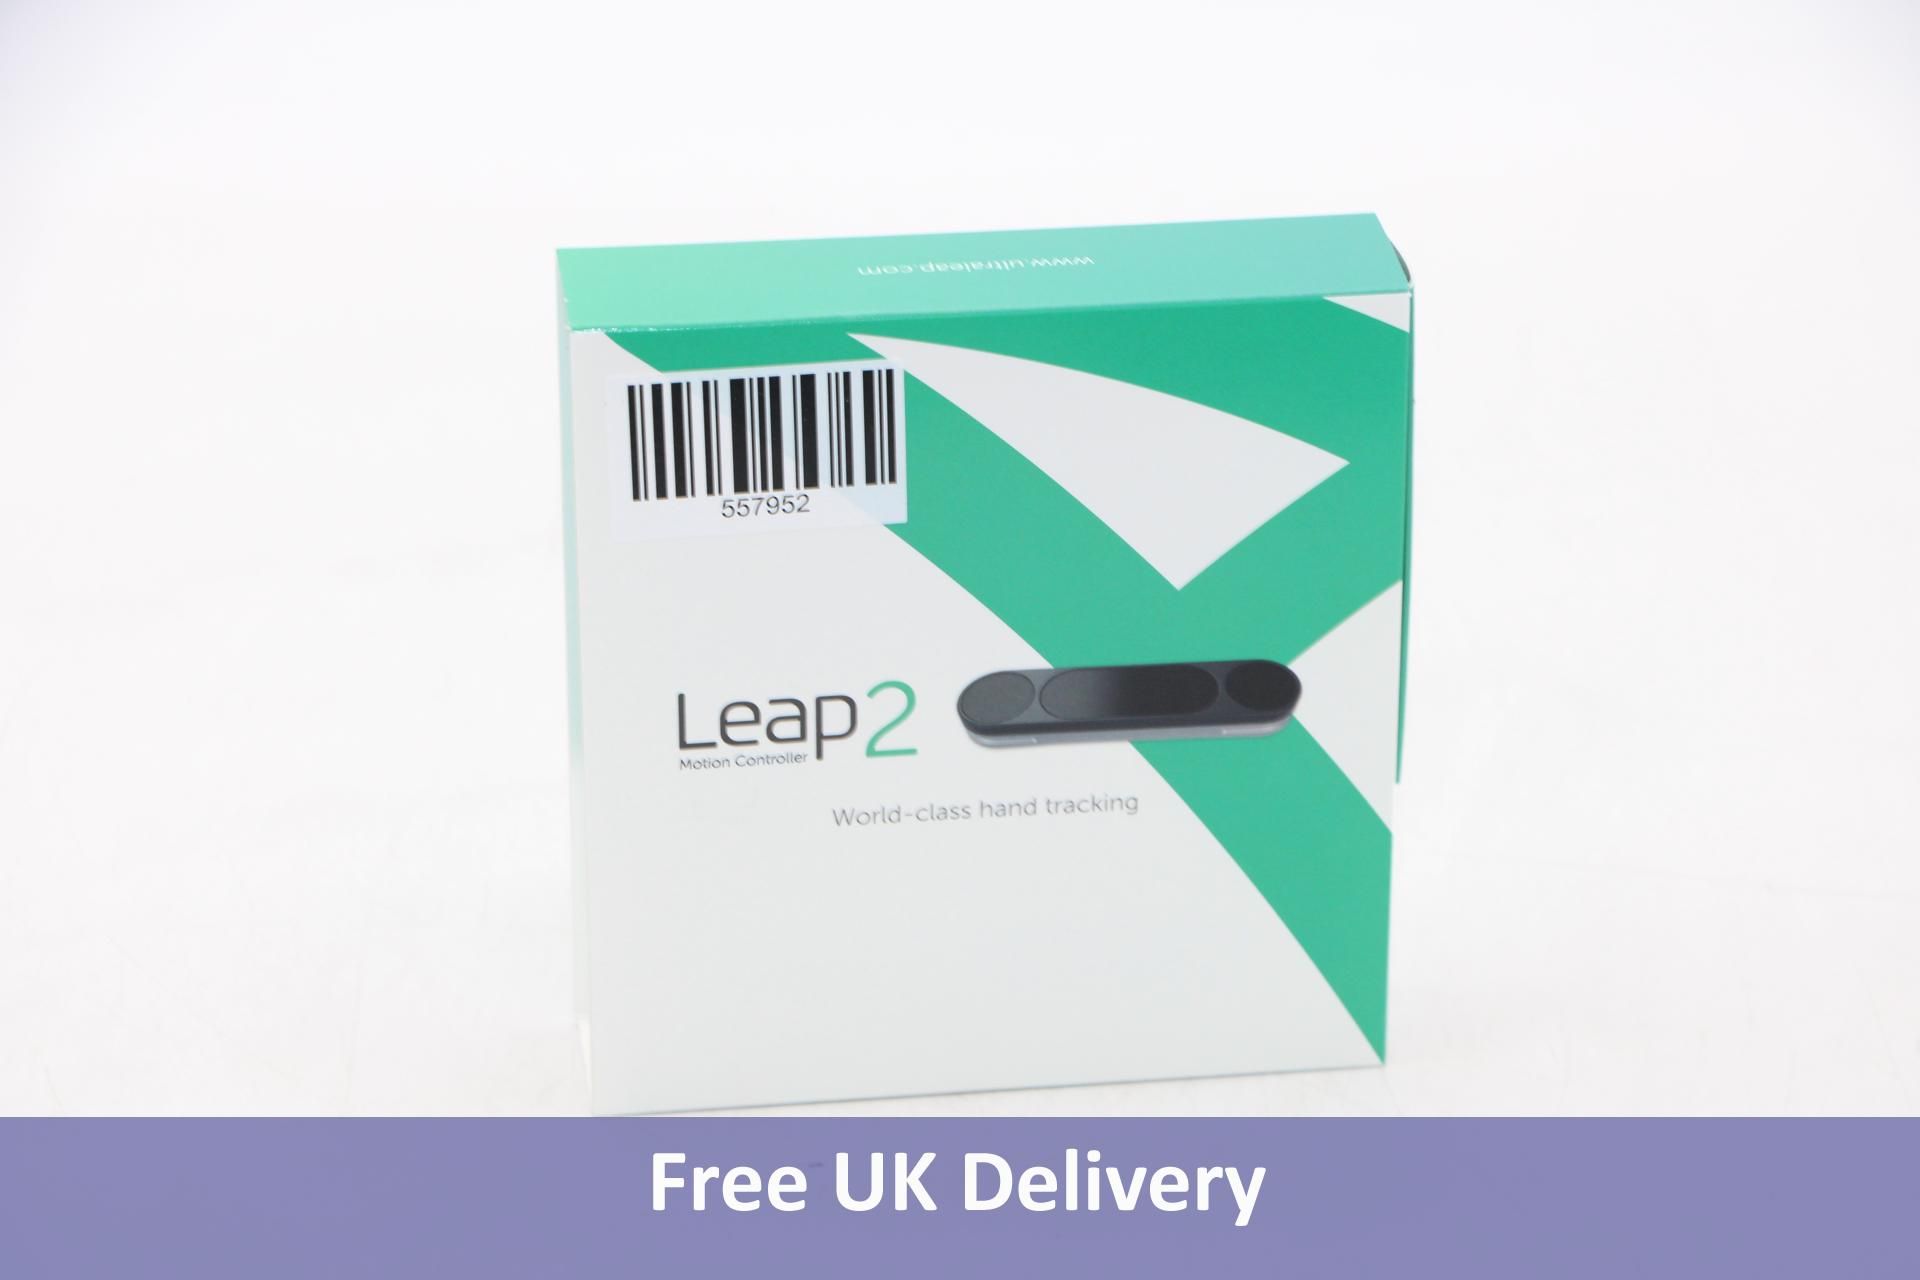 Five Ultraleap Leap Motion Controller 2. New, sealed. Total RRP £715 - Image 3 of 5